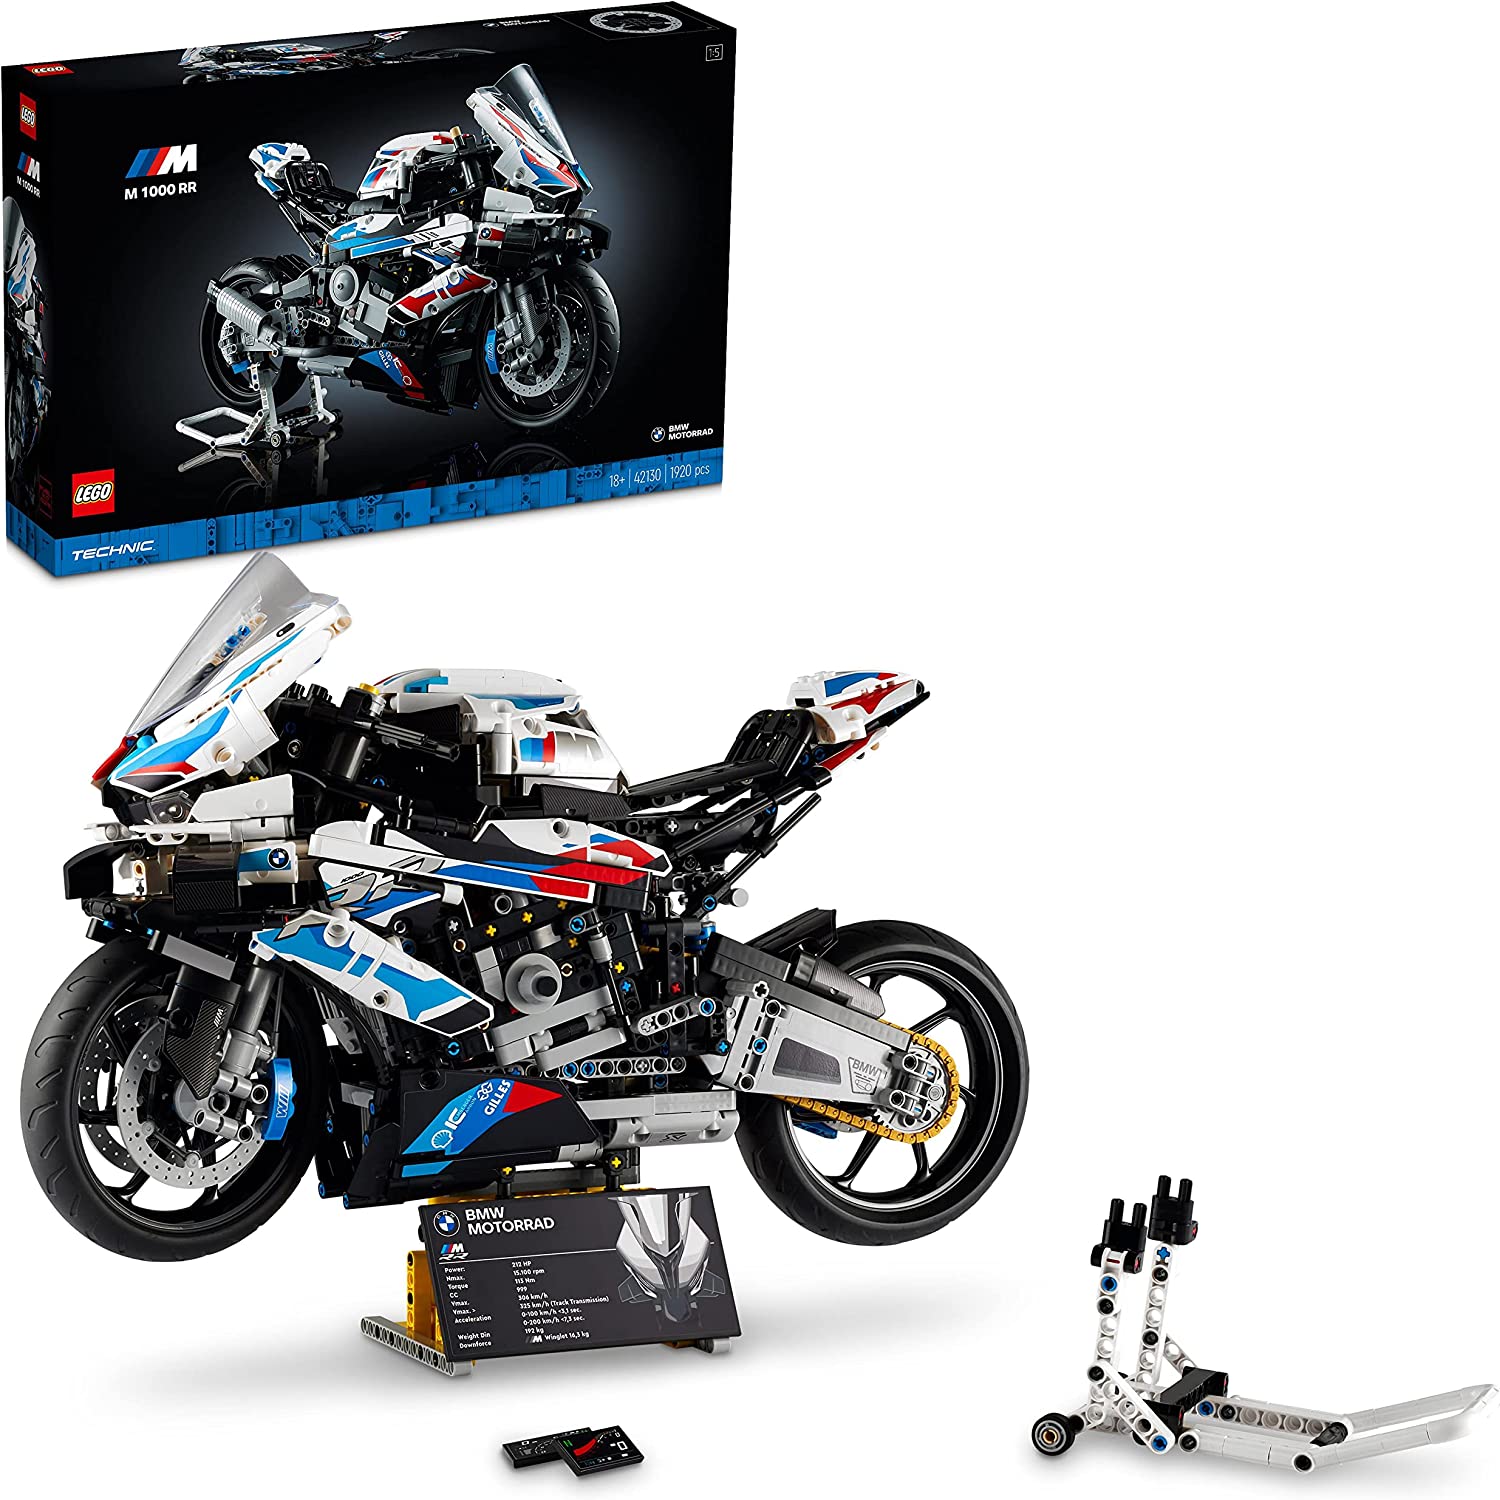 LEGO 42130 Technic BMW M 1000 RR motorcycle model for adults, model kit, set as a gift for tinkering